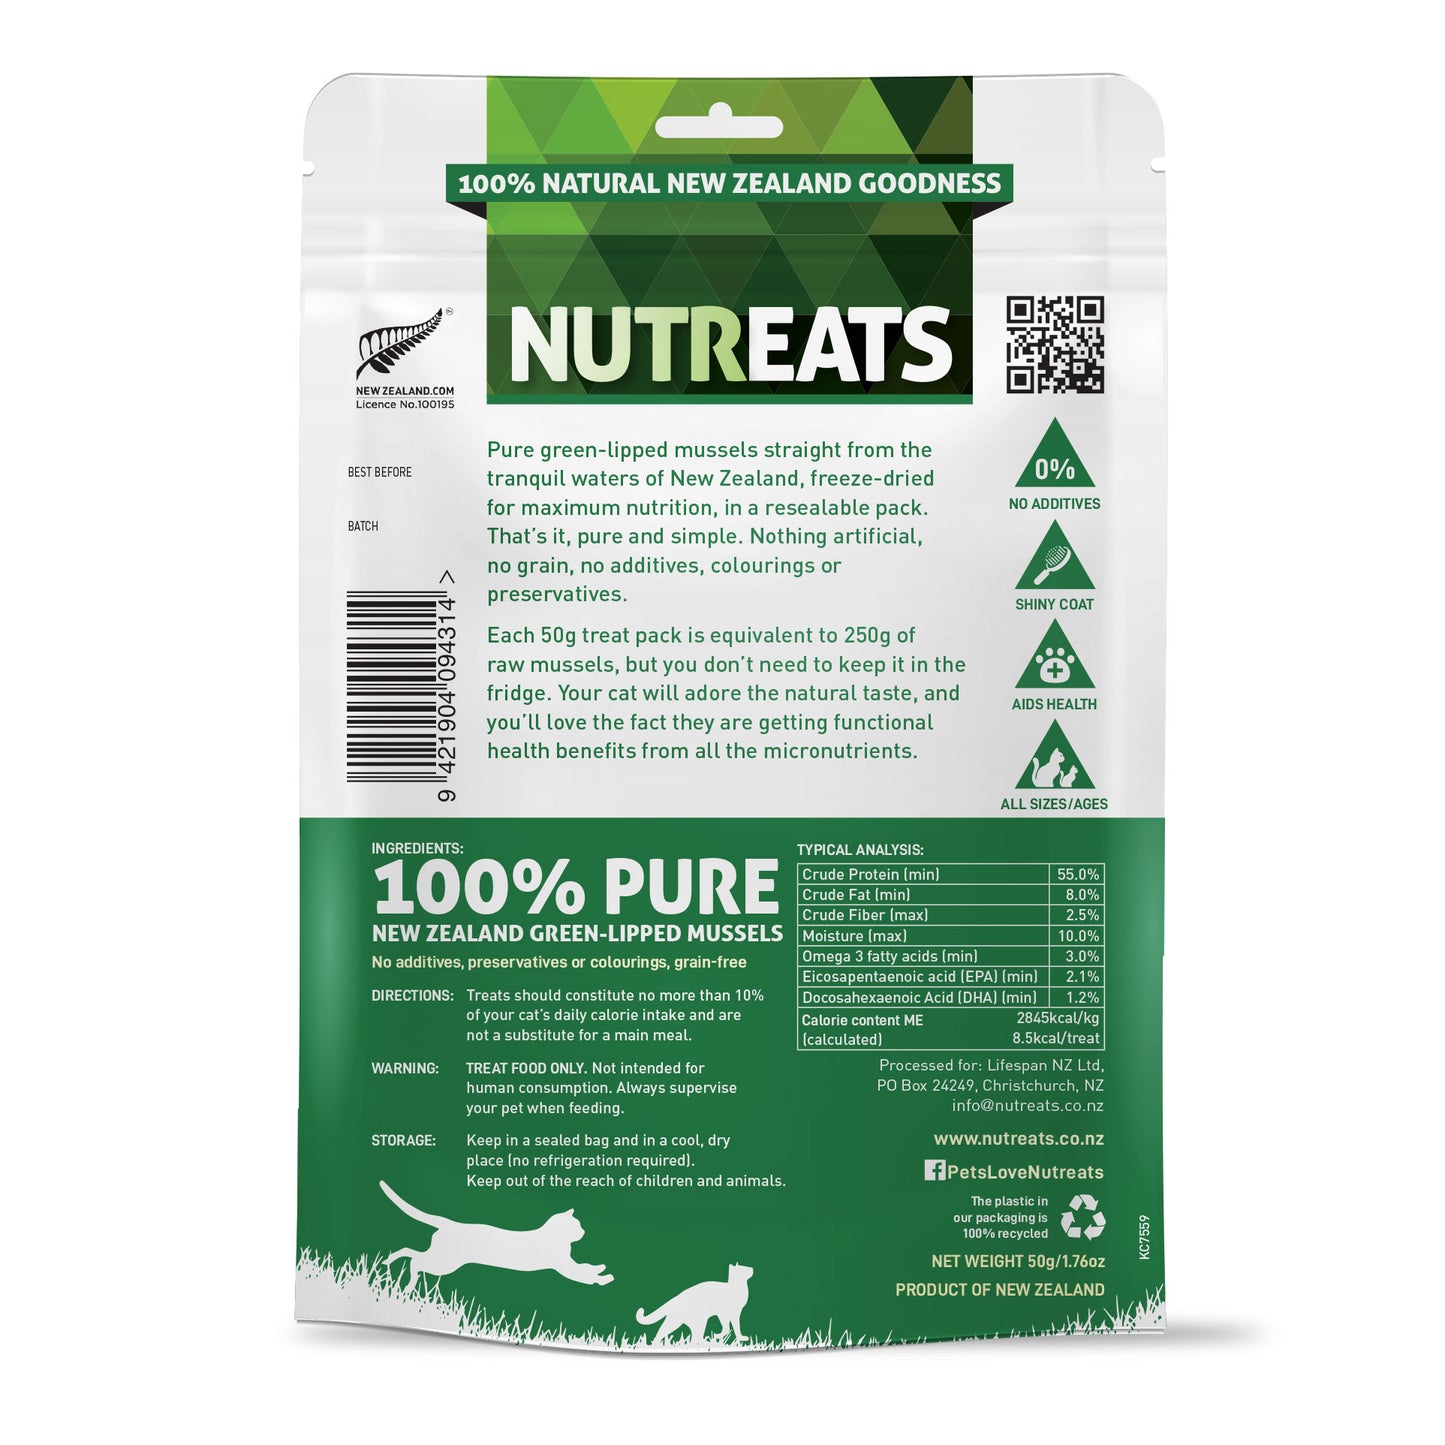 100% natural nutritional supplement treat for cats. New Zealand Green-lipped mussels. Freeze-dried and 100% natural. Great for supporting healthy joints, ski and glossy coat and may help support immunity. Natural Omega-3 functional treats.